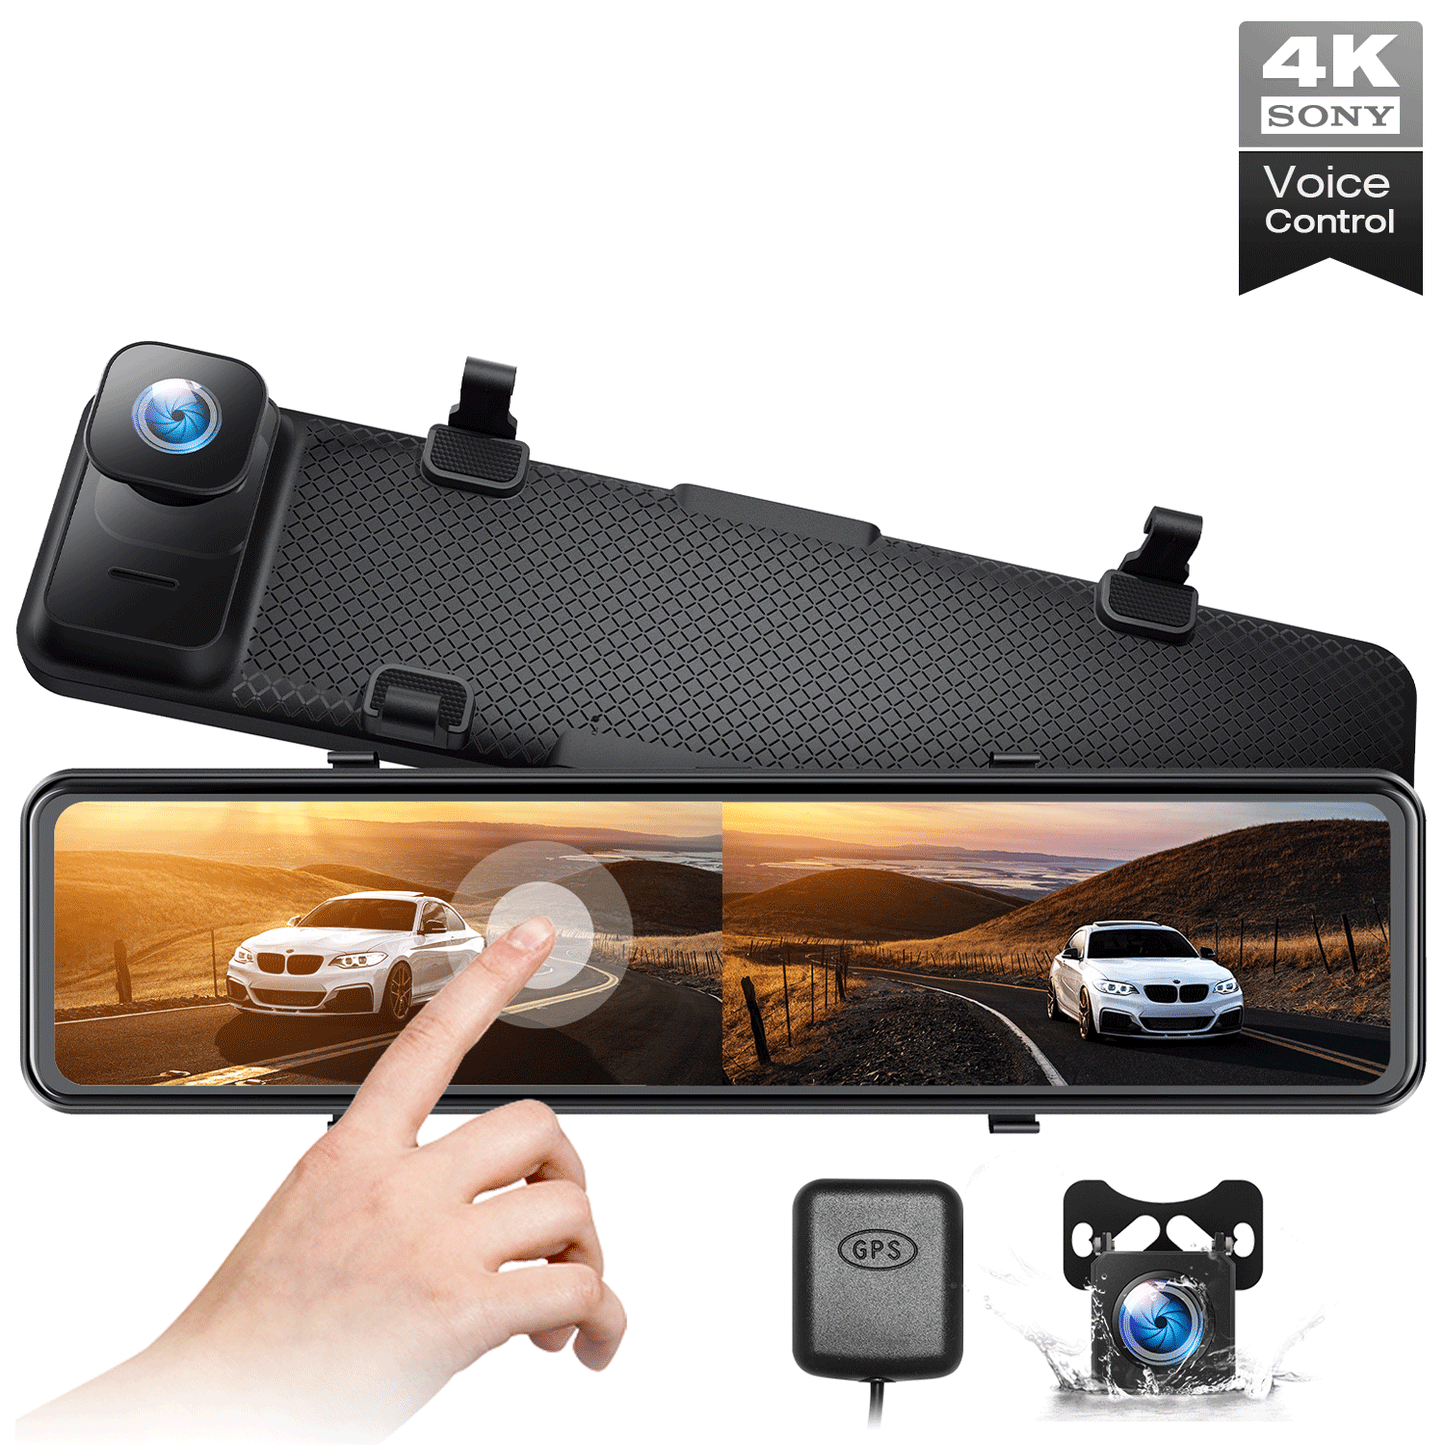 TOGUARD Mirror Dash Cam Full Touch Screen Front and Rear Dual Lens 4K GPS Backup Camera Voice Control Car DVR Recorder Night Vision Waterproof